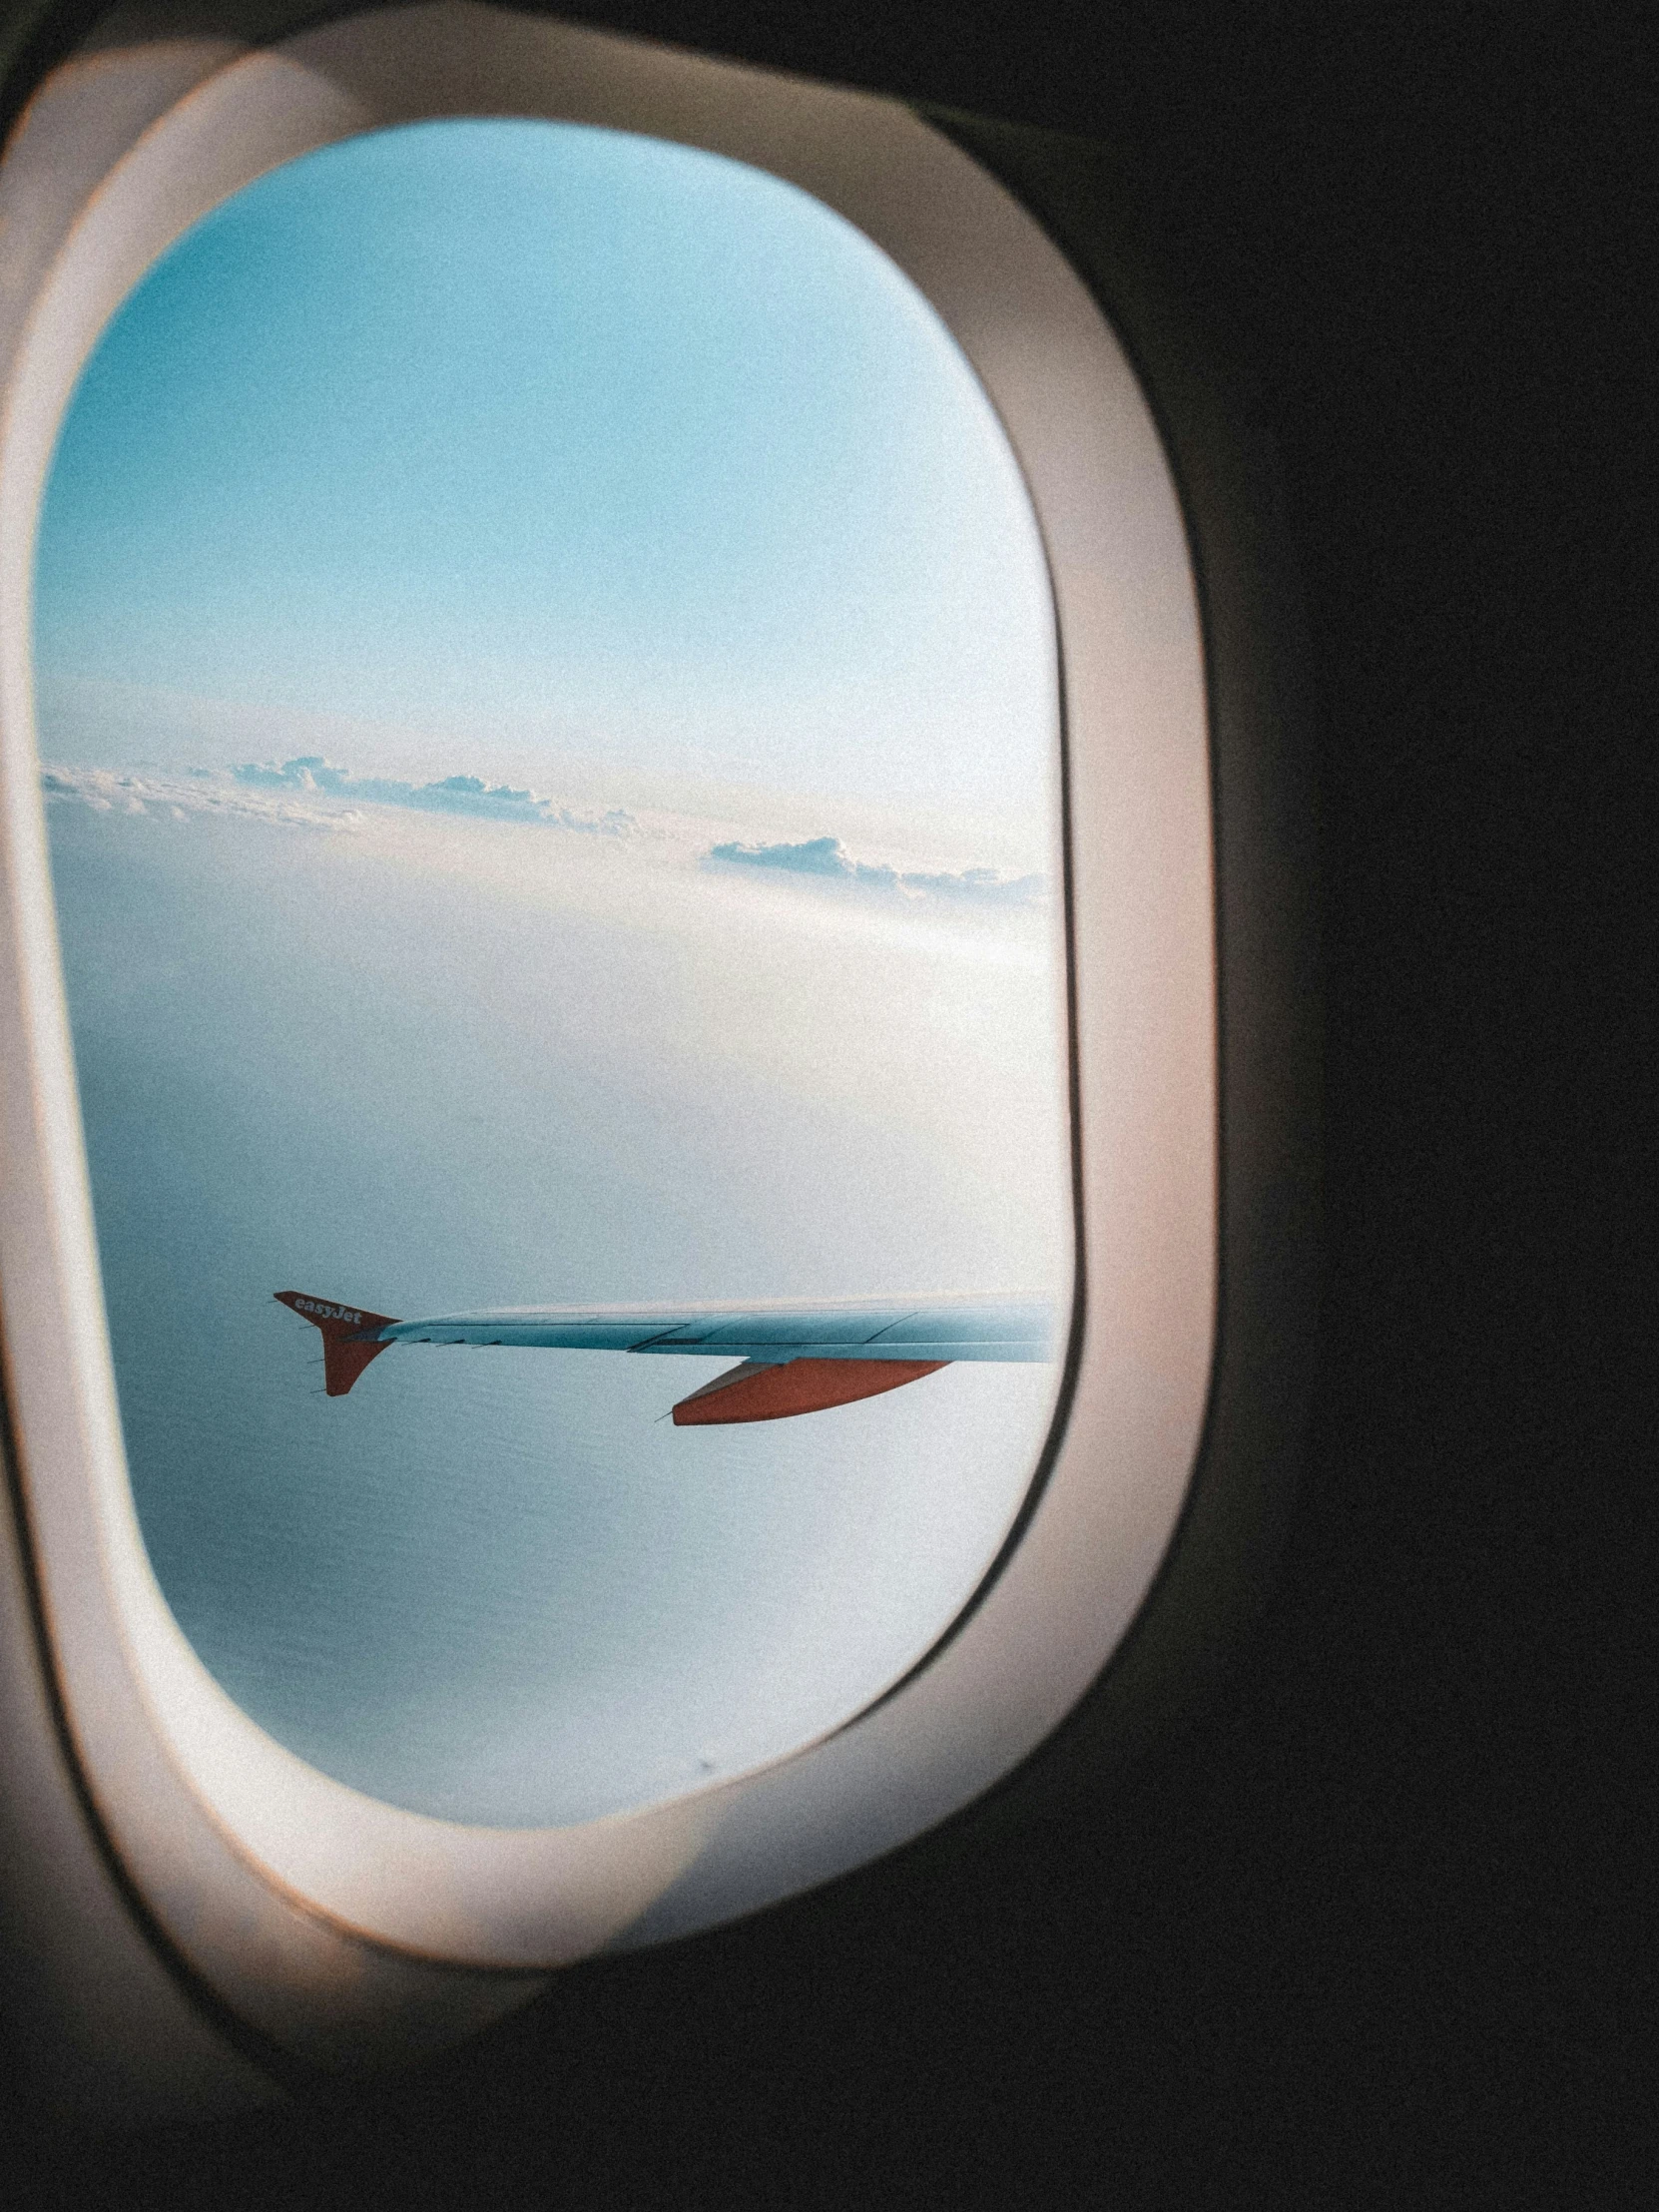 a plane's windows during flight are clear